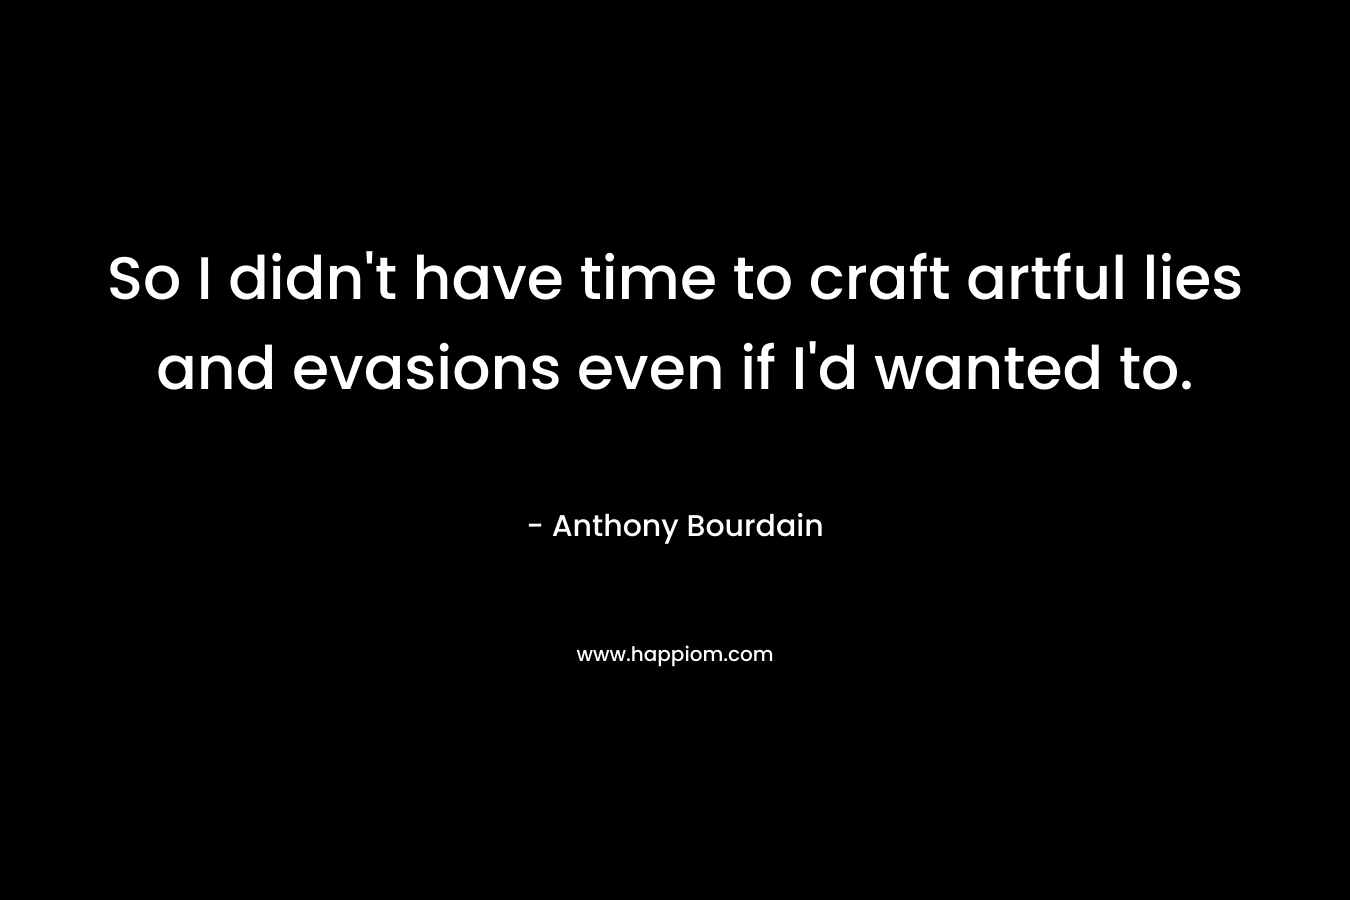 So I didn’t have time to craft artful lies and evasions even if I’d wanted to. – Anthony Bourdain